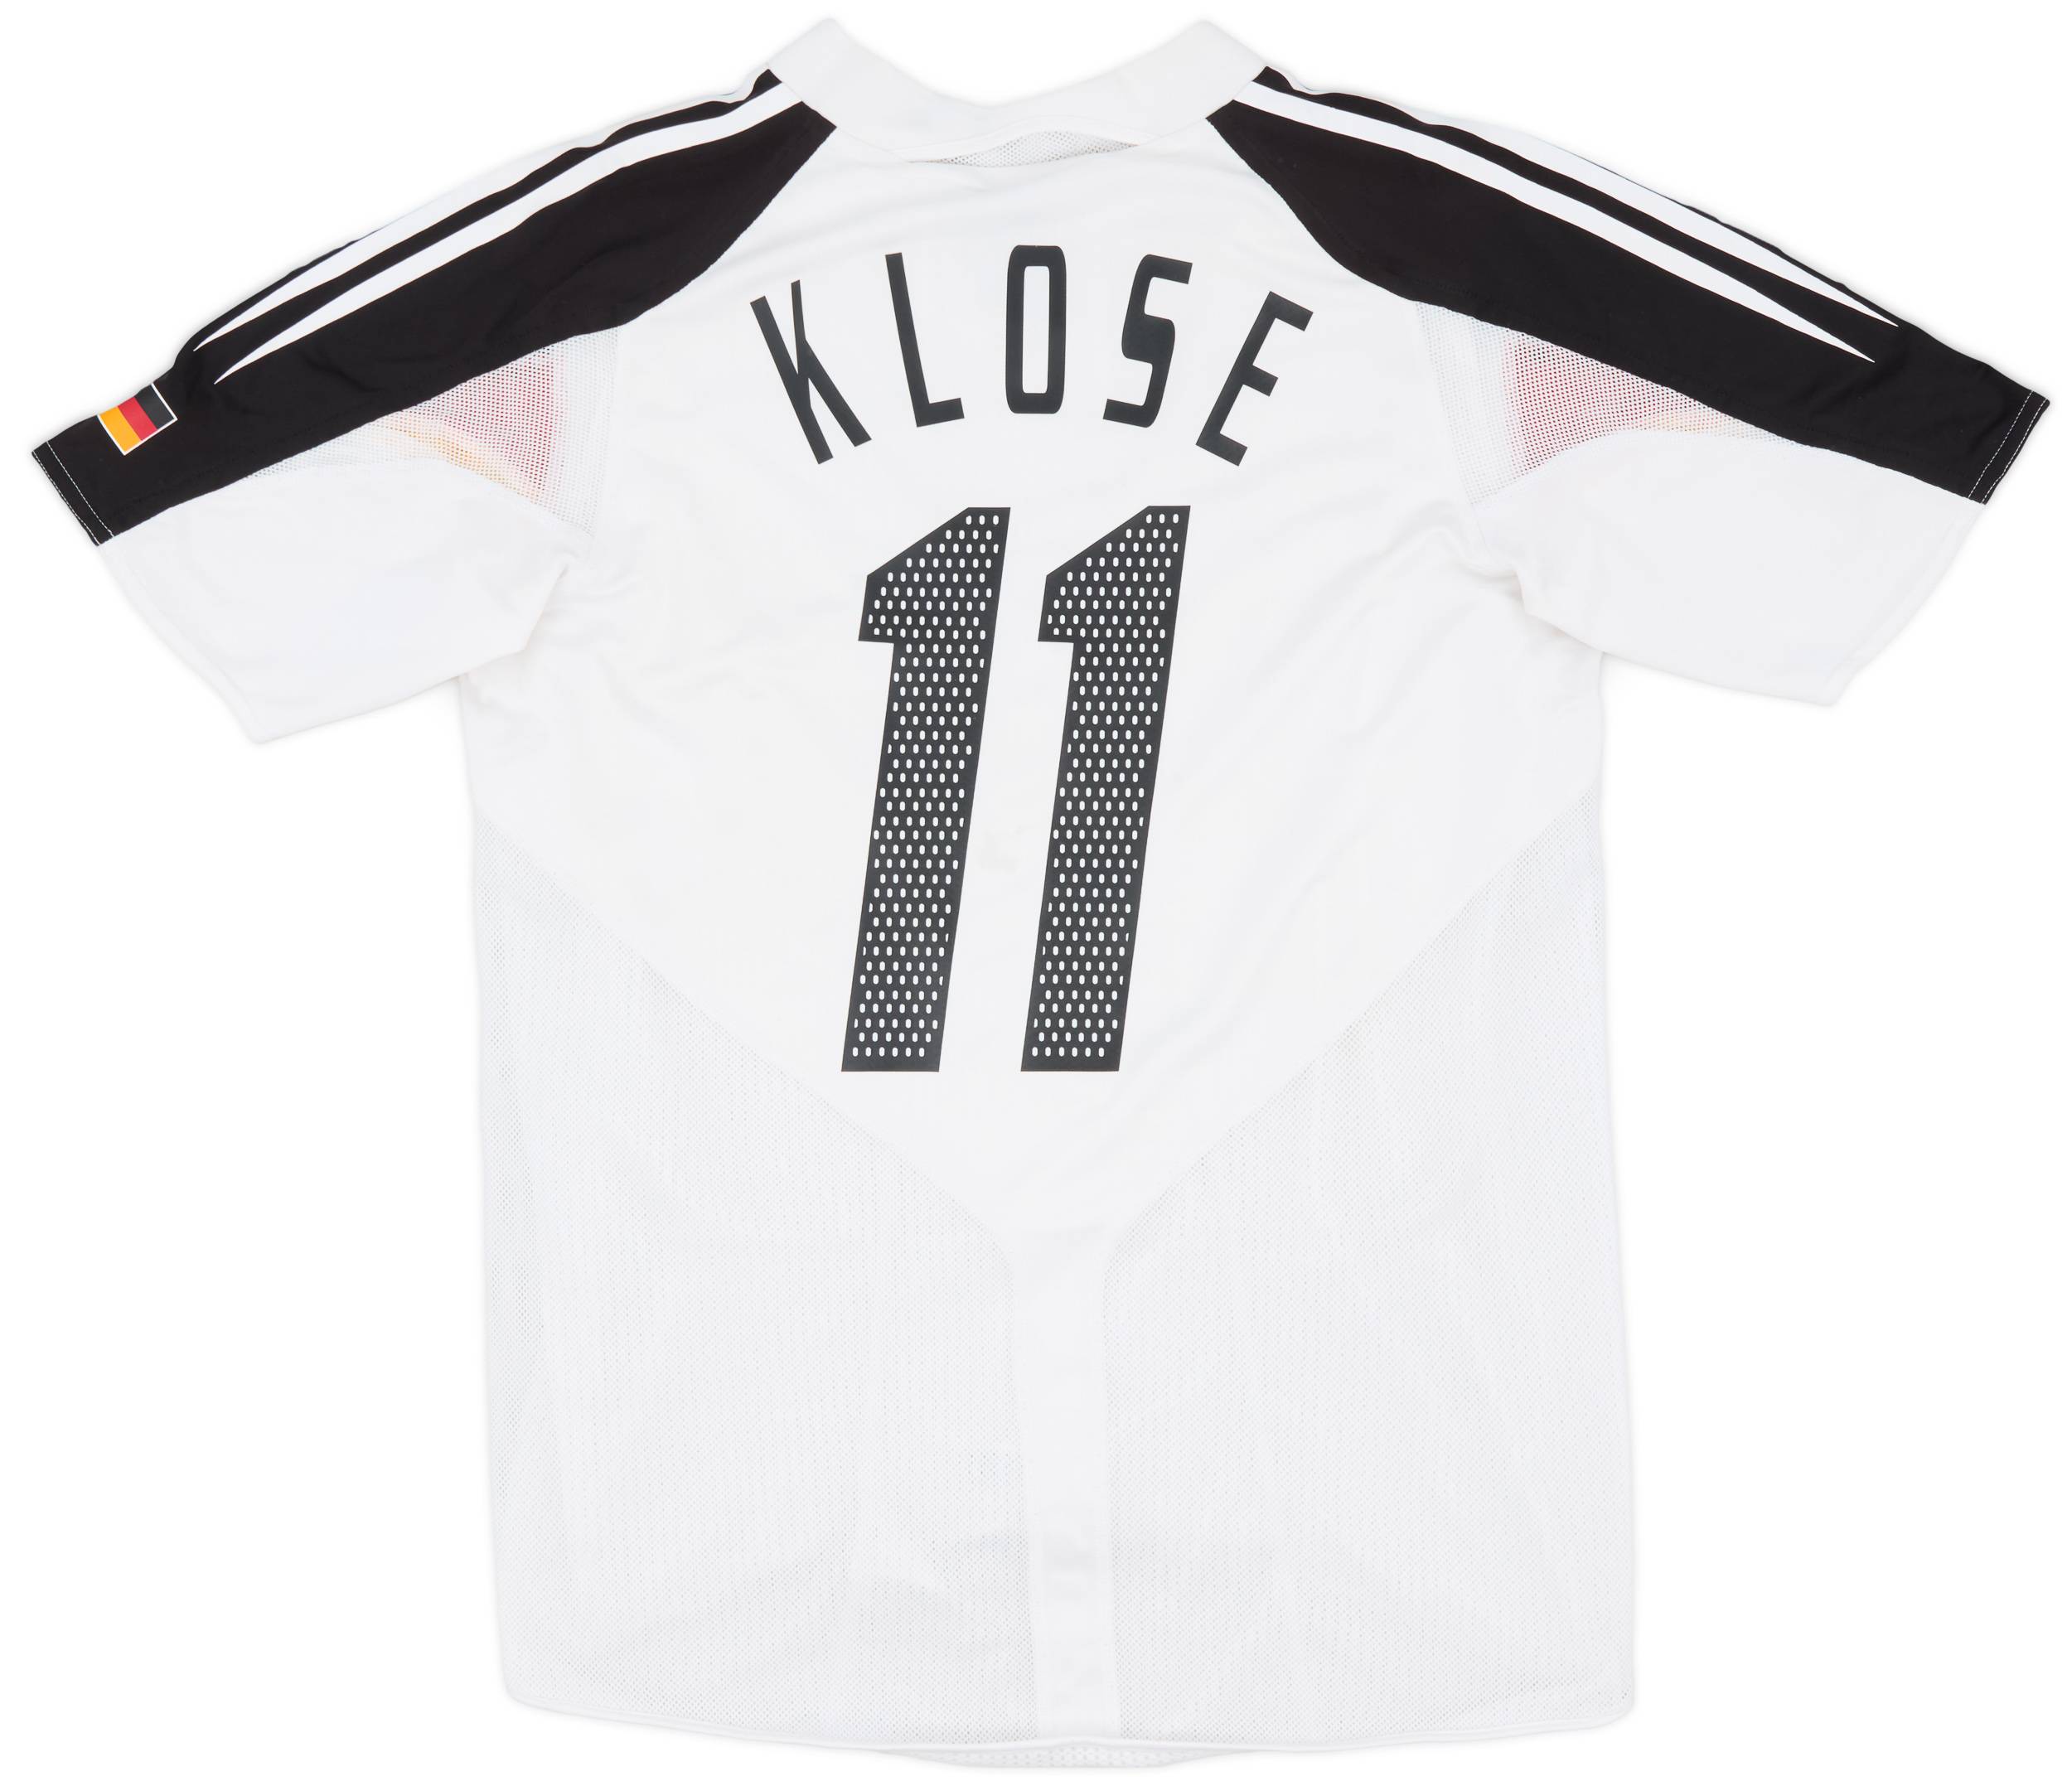 2004-05 Germany Player Issue Home Shirt Klose #11 - 8/10 - (M)